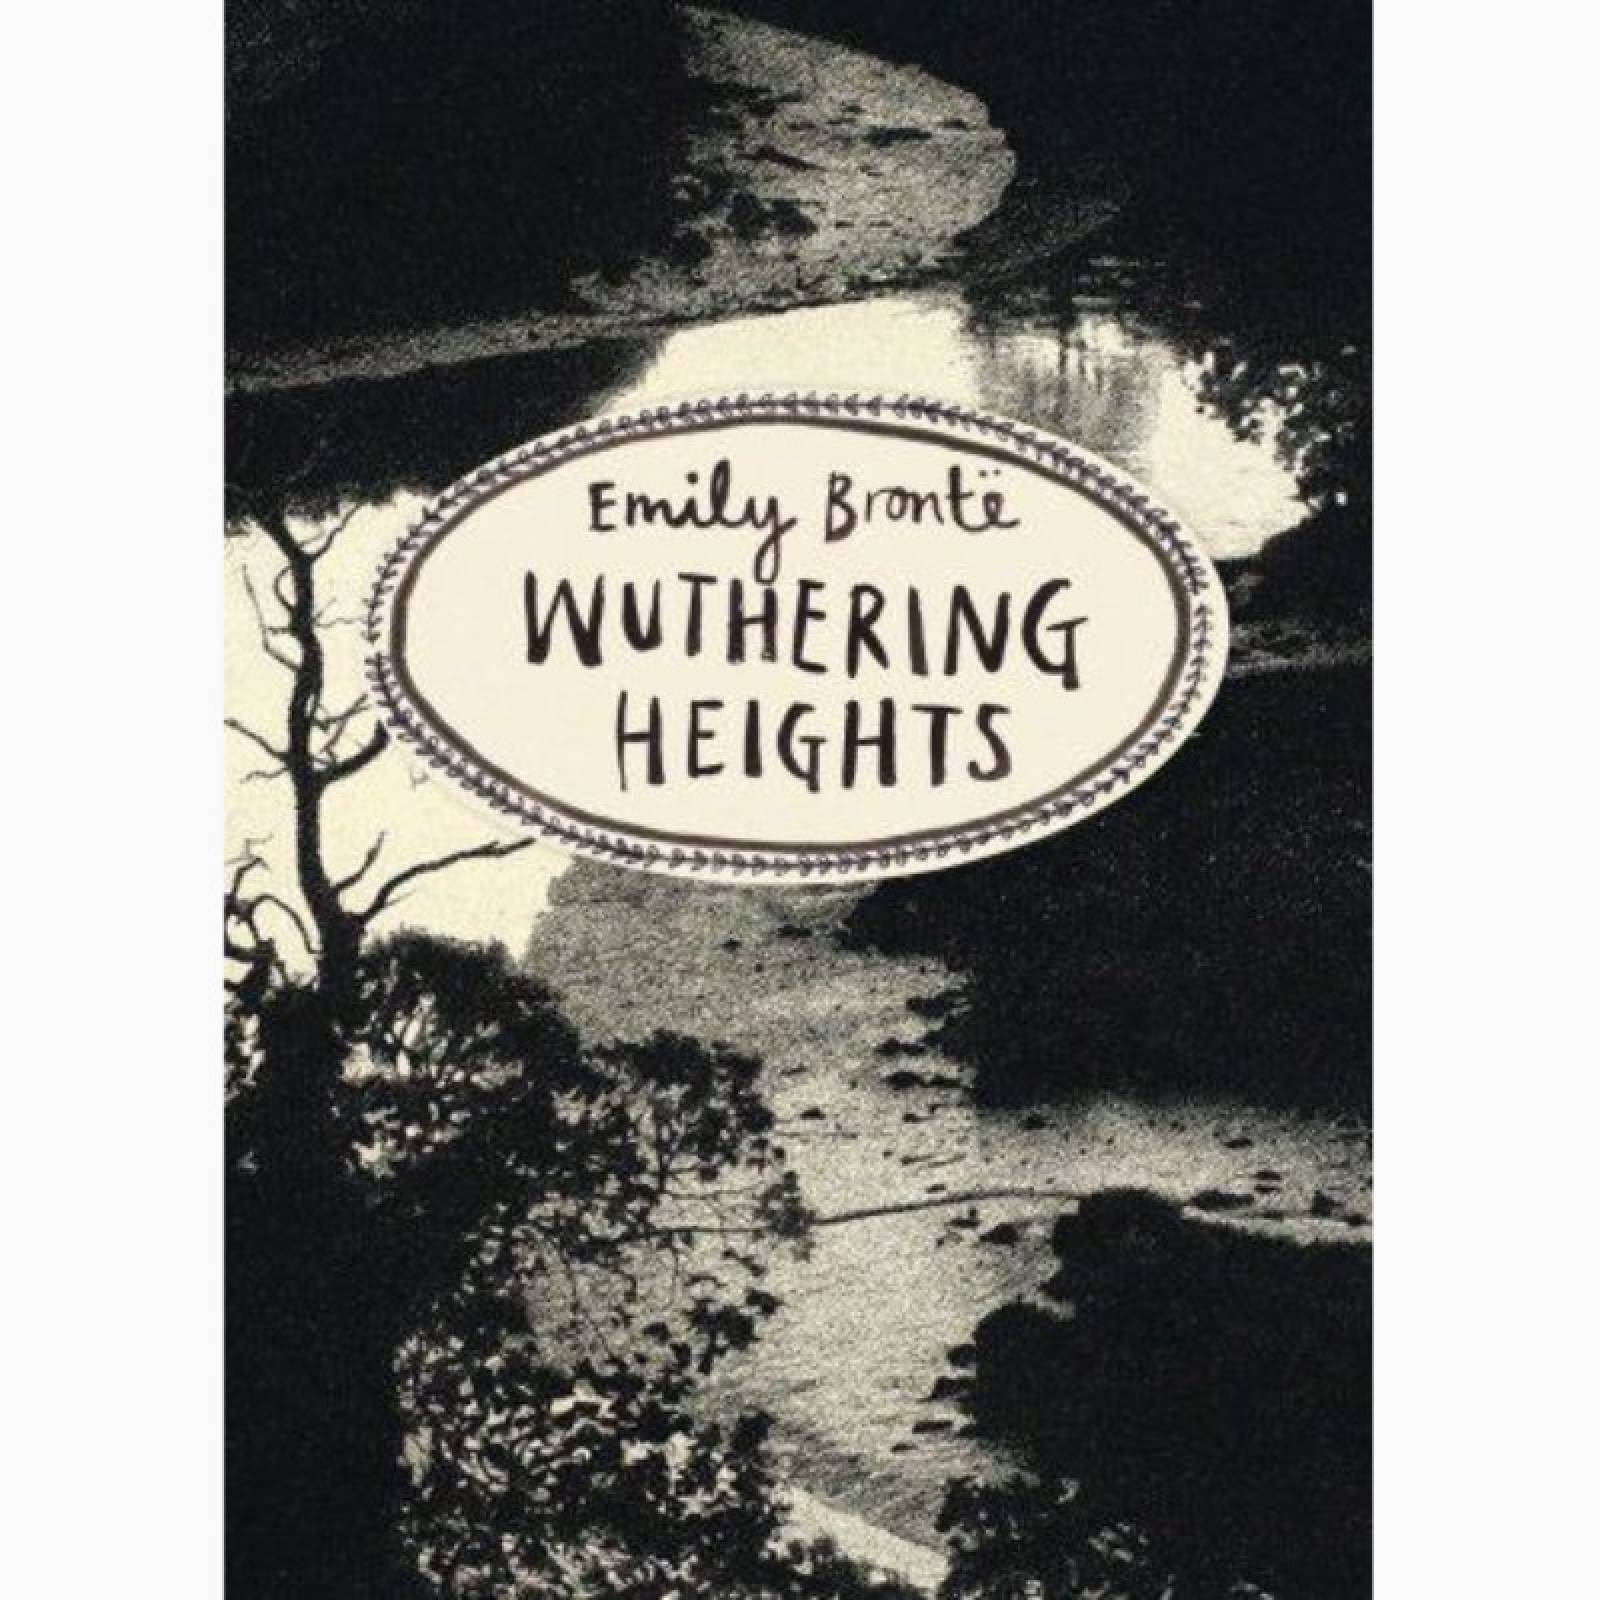 Wuthering Heights By Emily Brontë - Paperback Book